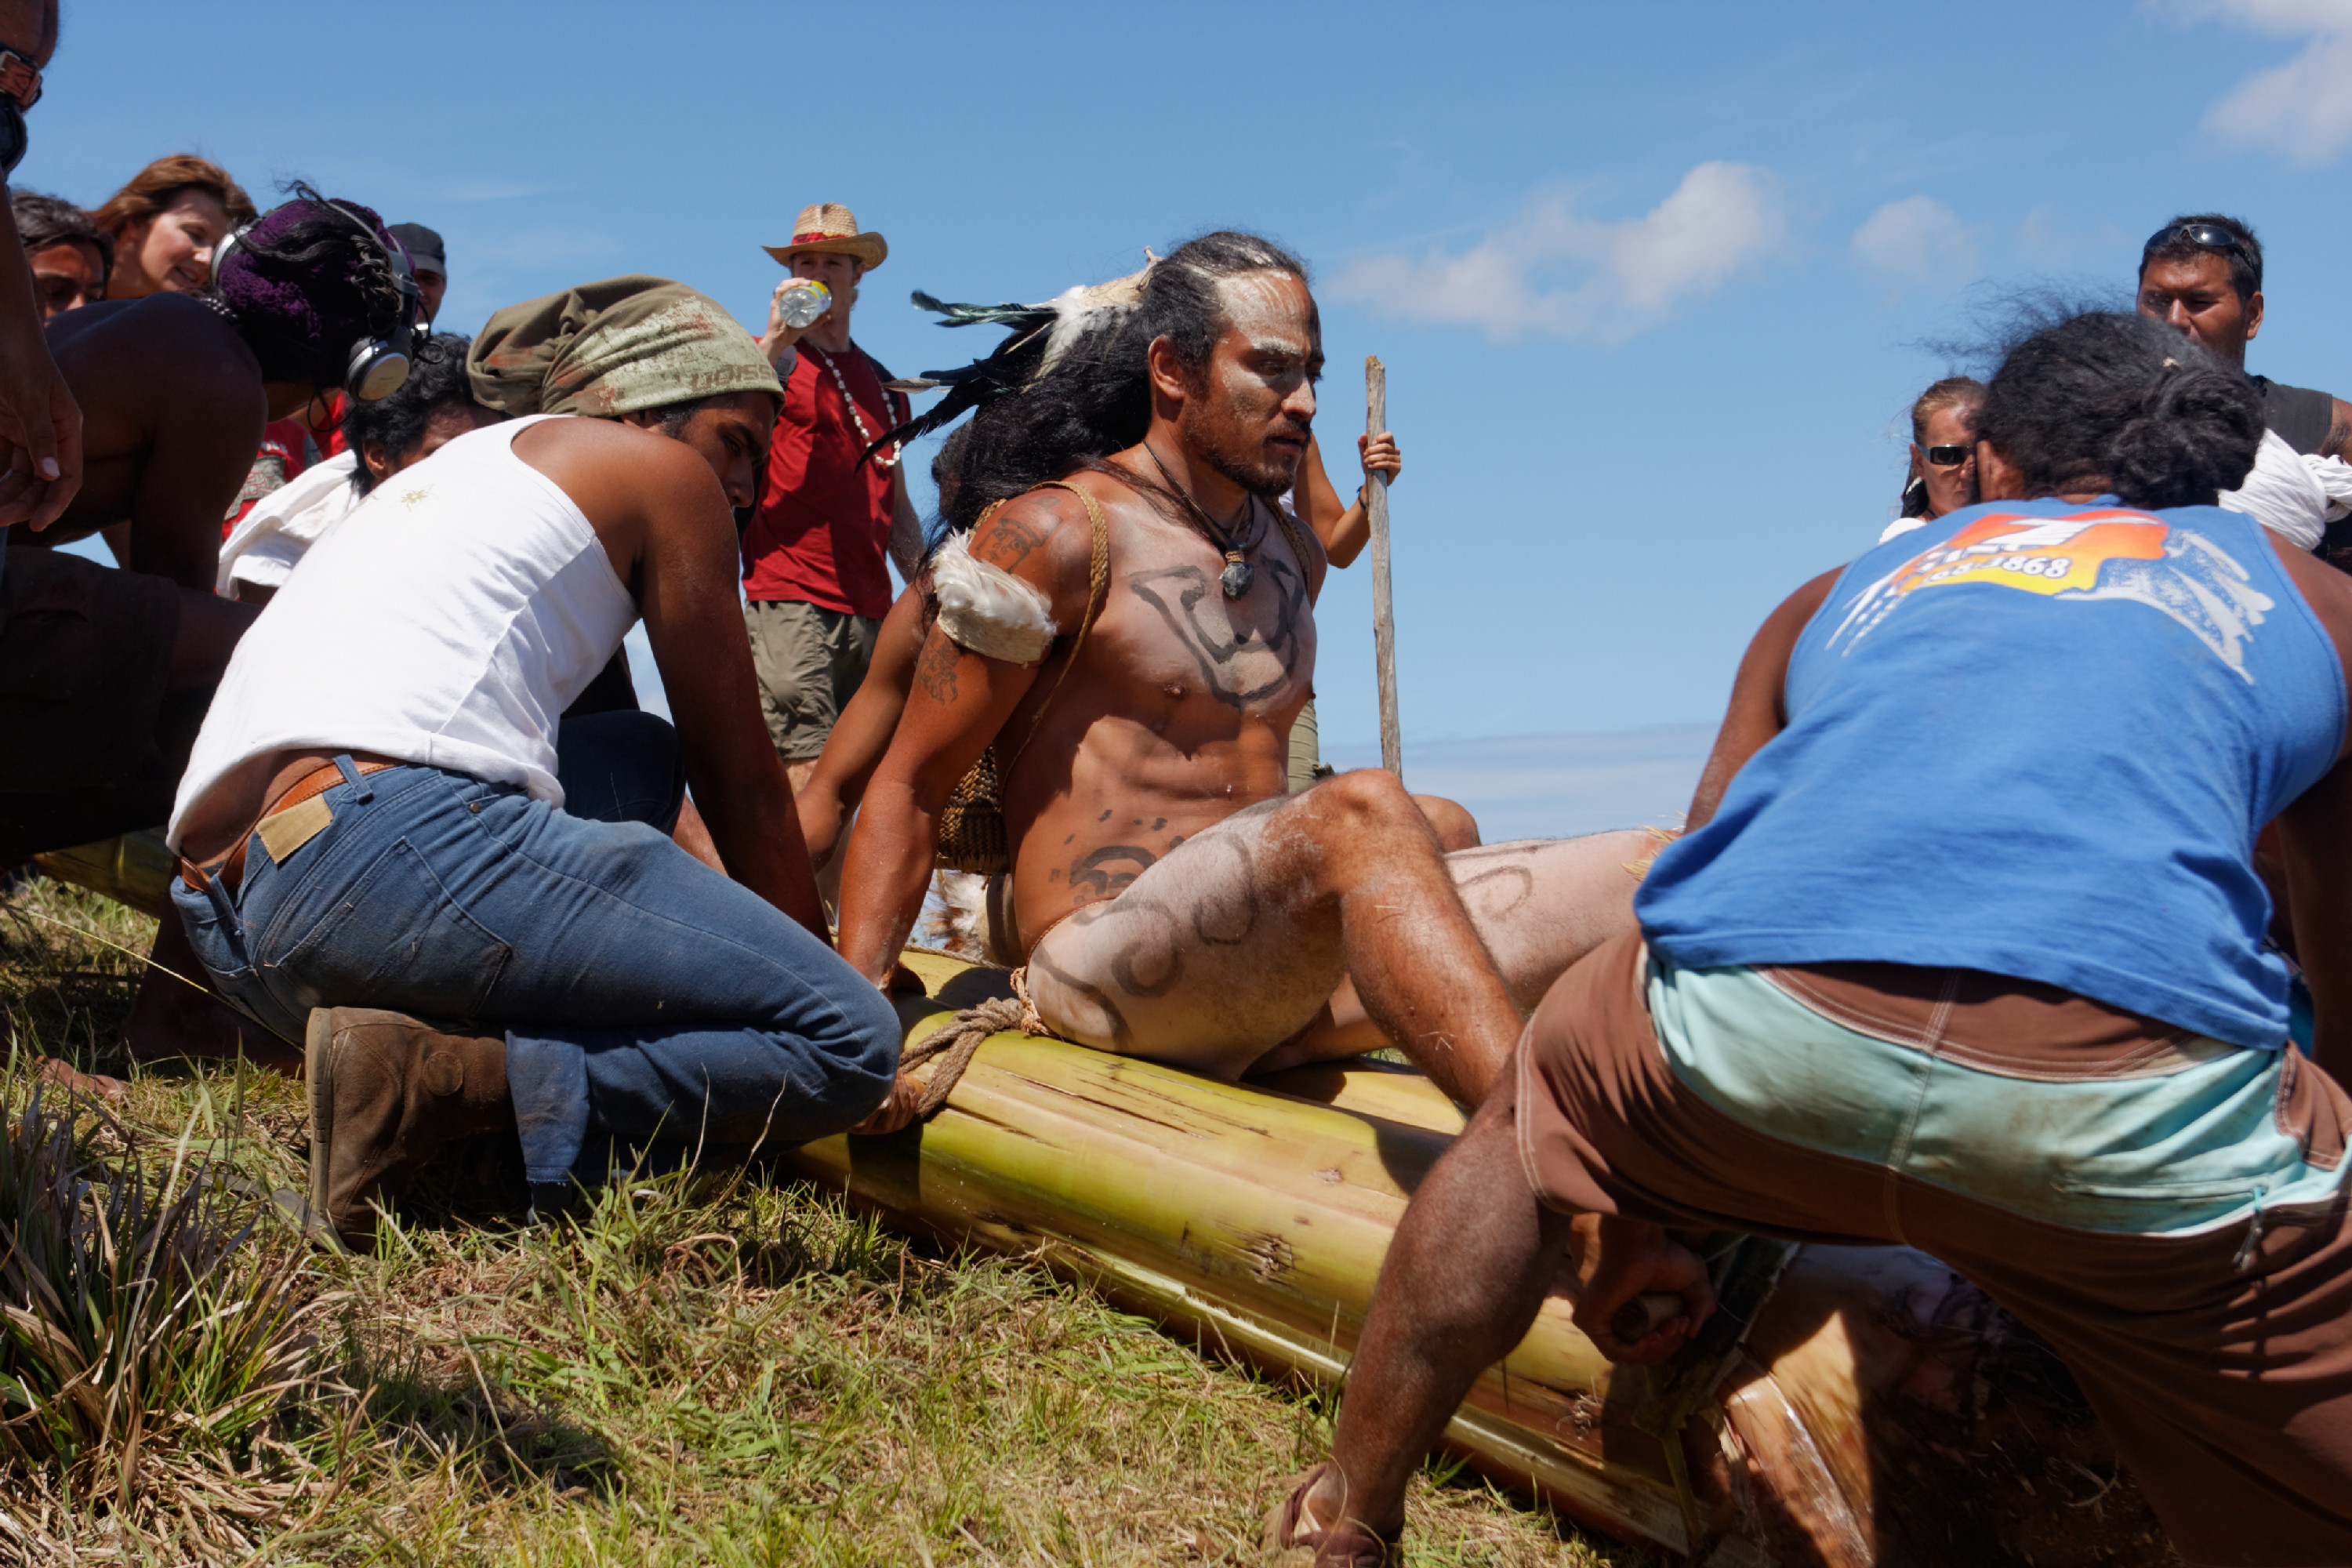 A Haka Pei racer prepares to launch © Jean-Bernard Carillet / Lonely Planet